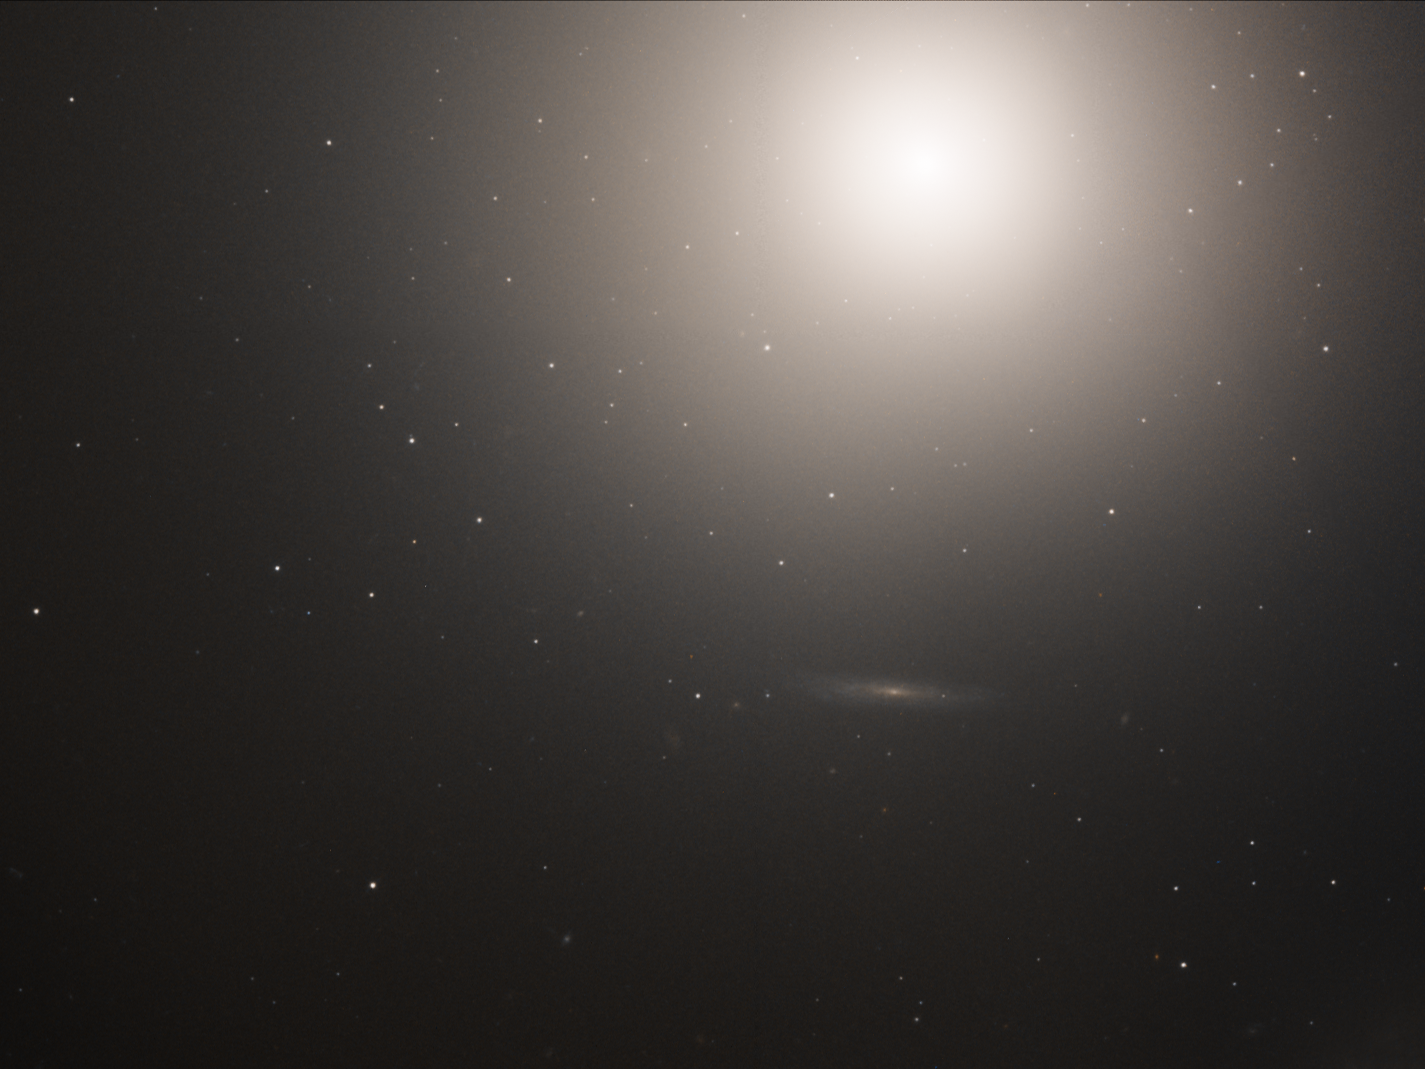 A hazy, yellow-white light shines near the top right, against black space dotted with faint, distant stars.